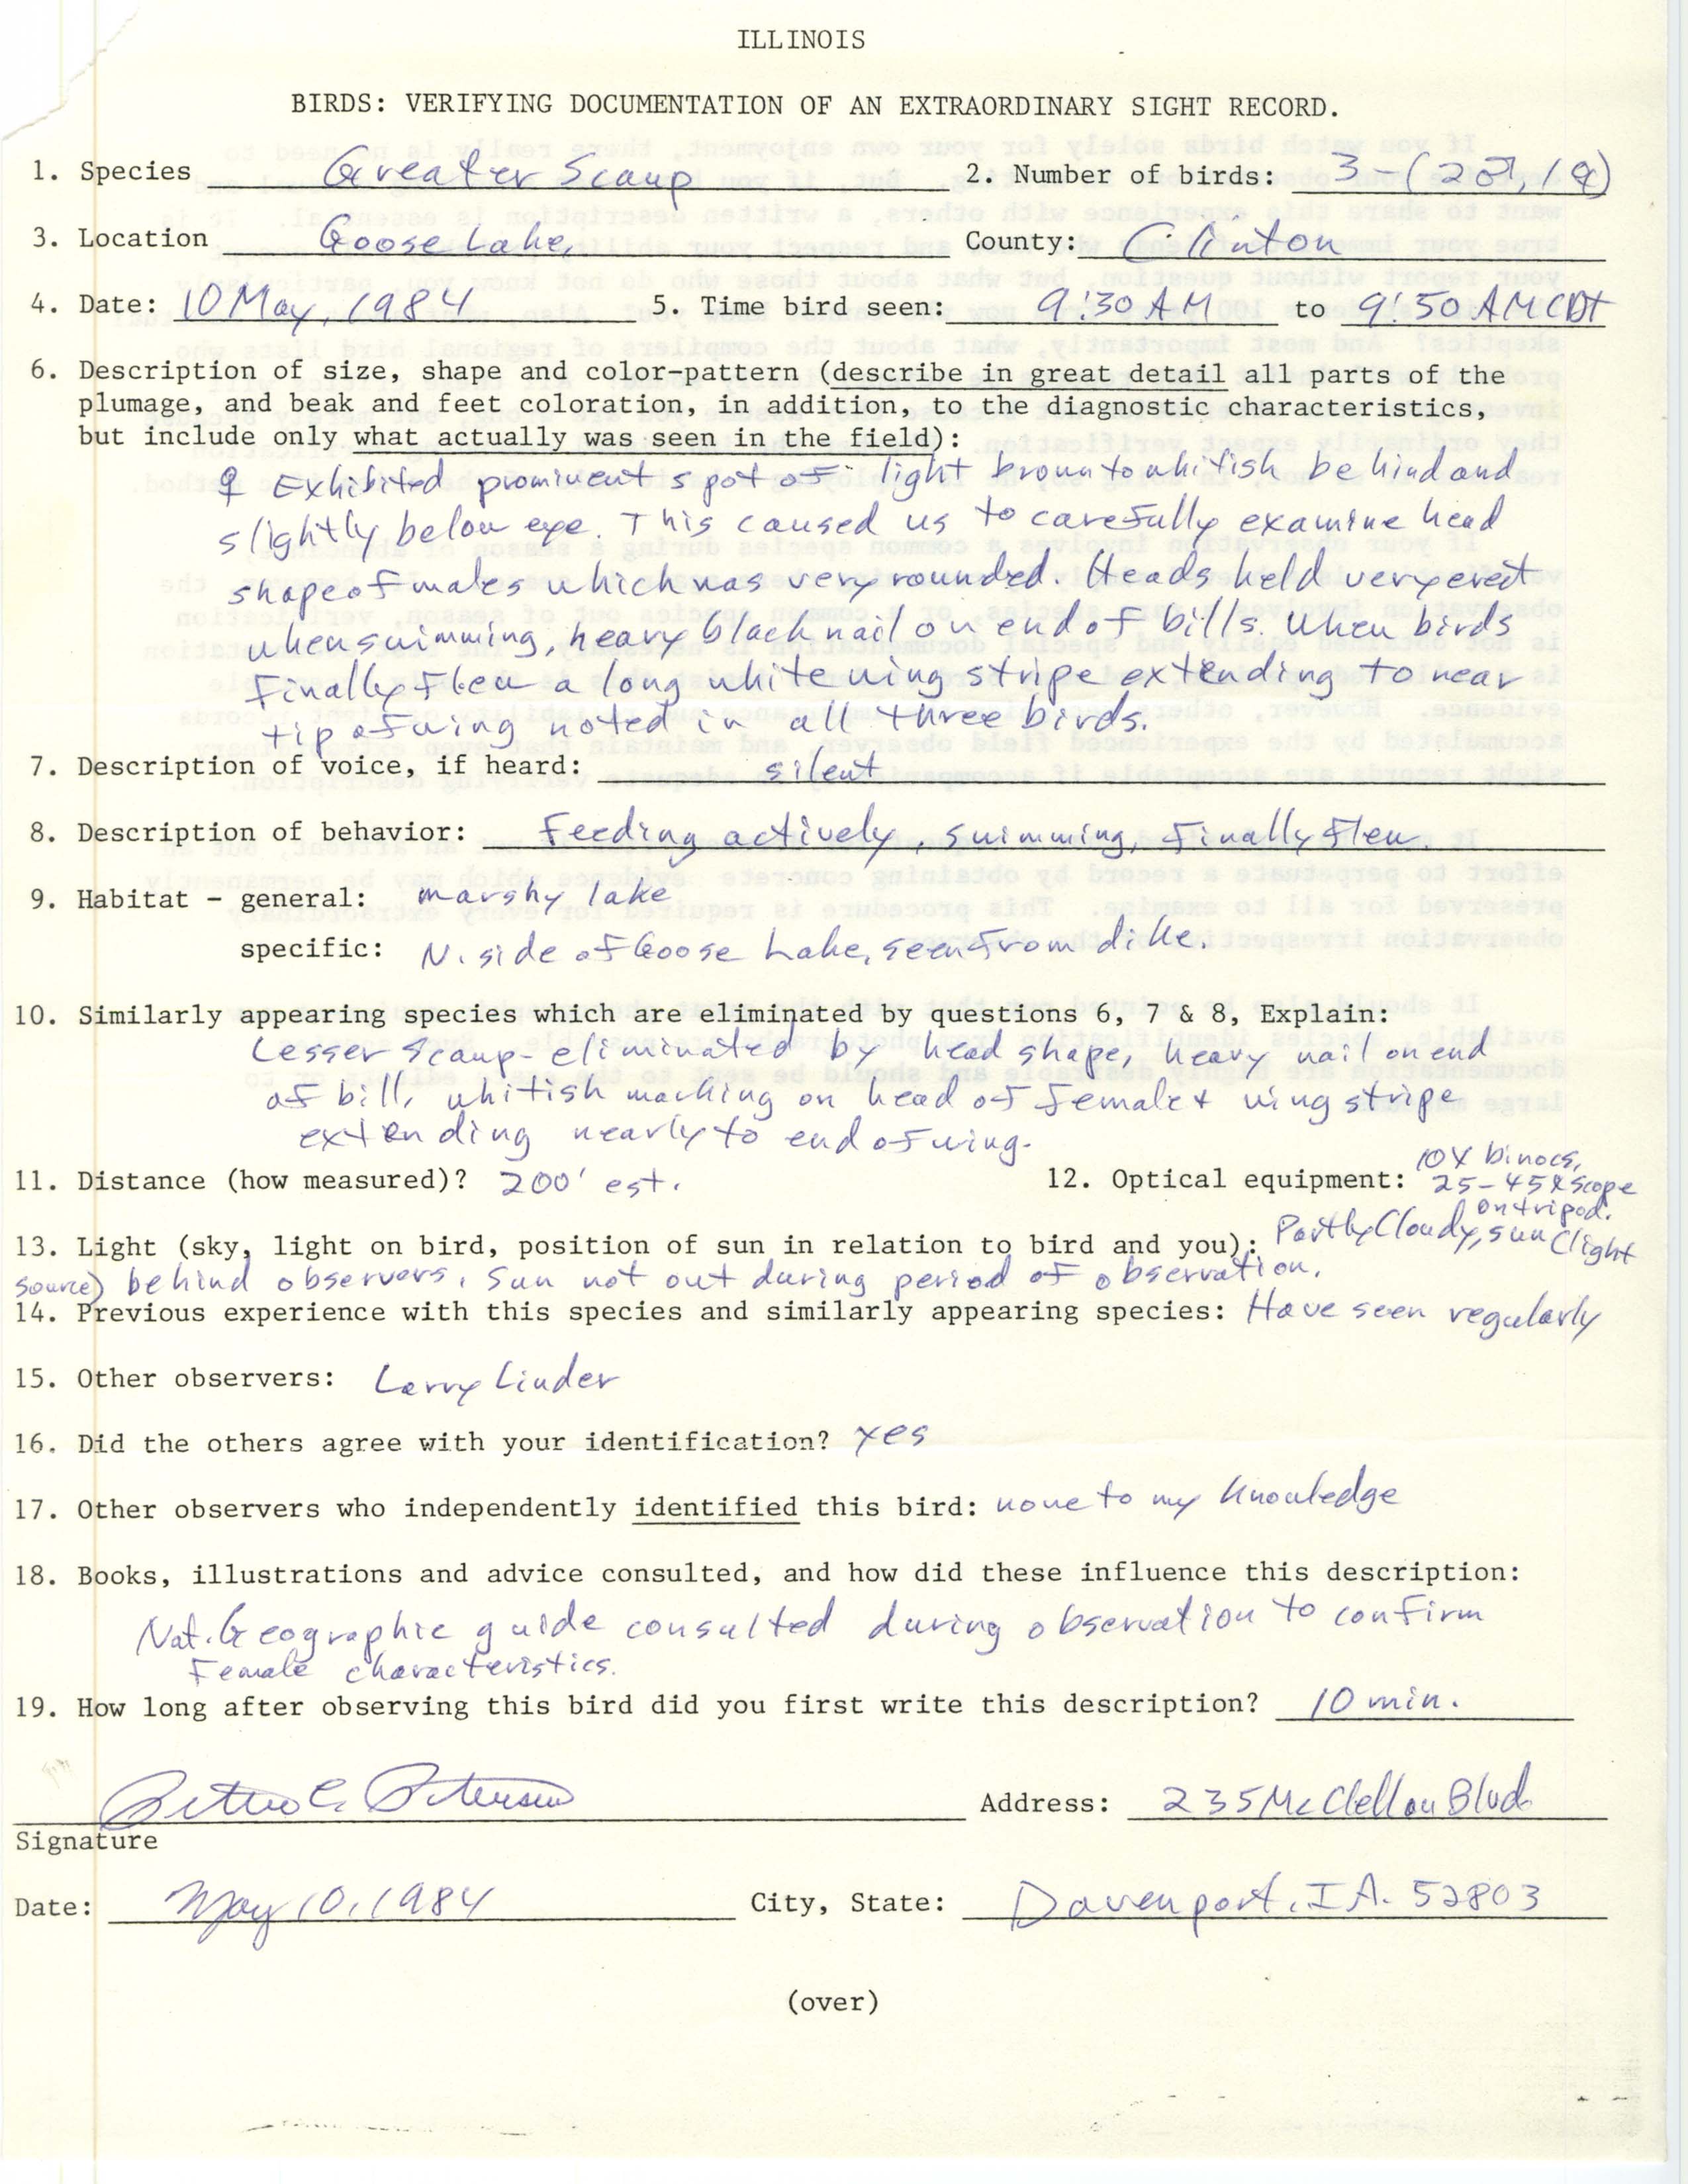 Rare bird documentation form for Greater Scaup at Goose Lake, 1984